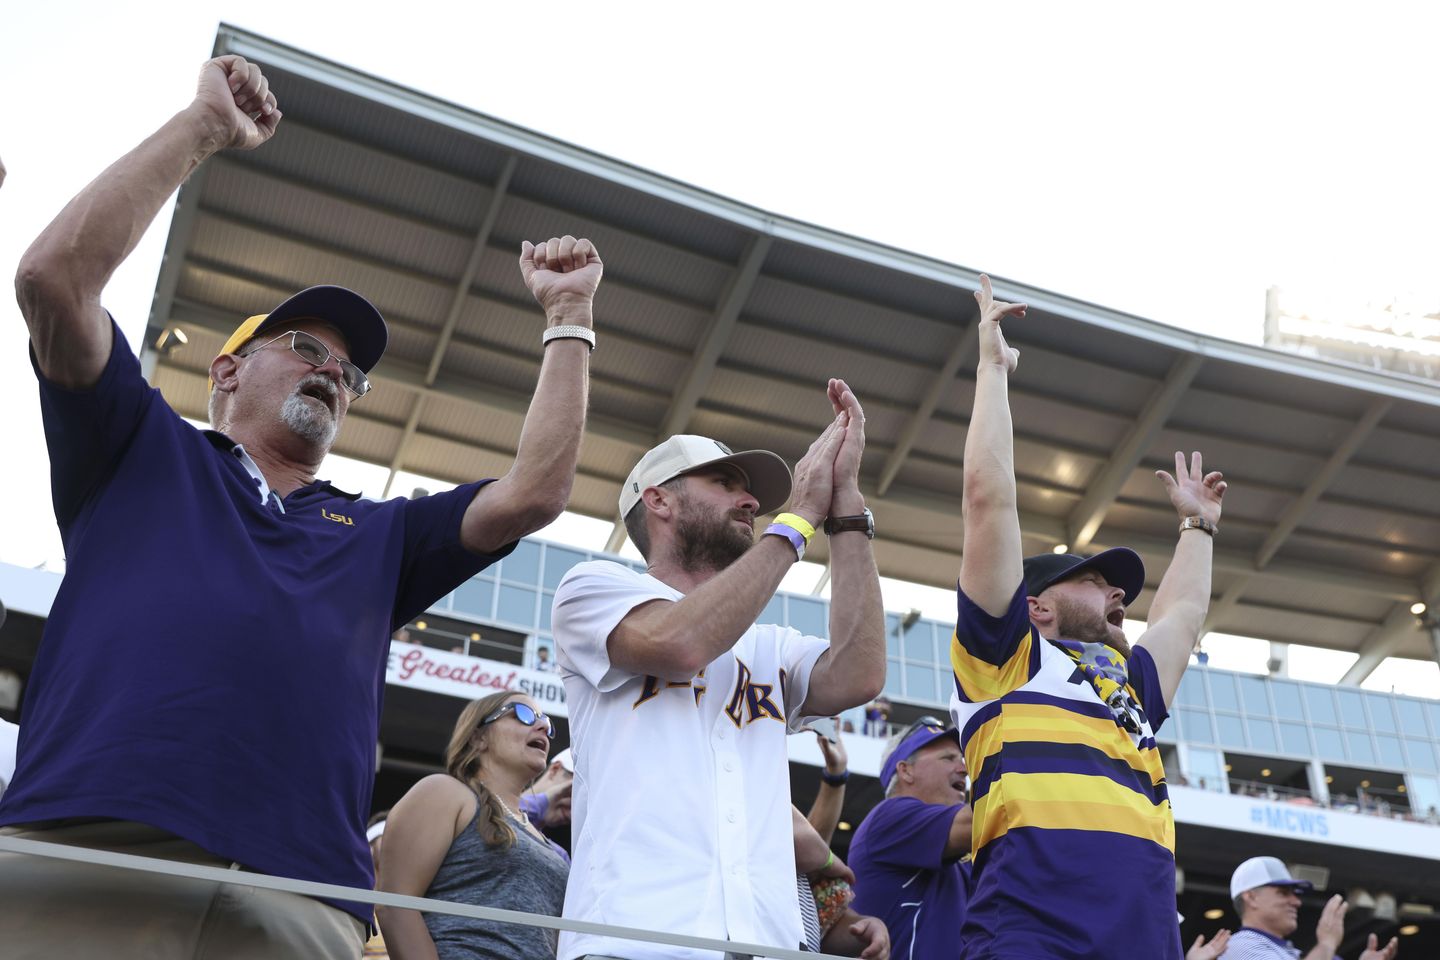 LSU wins 1st College World Series title since 2009, beating Florida